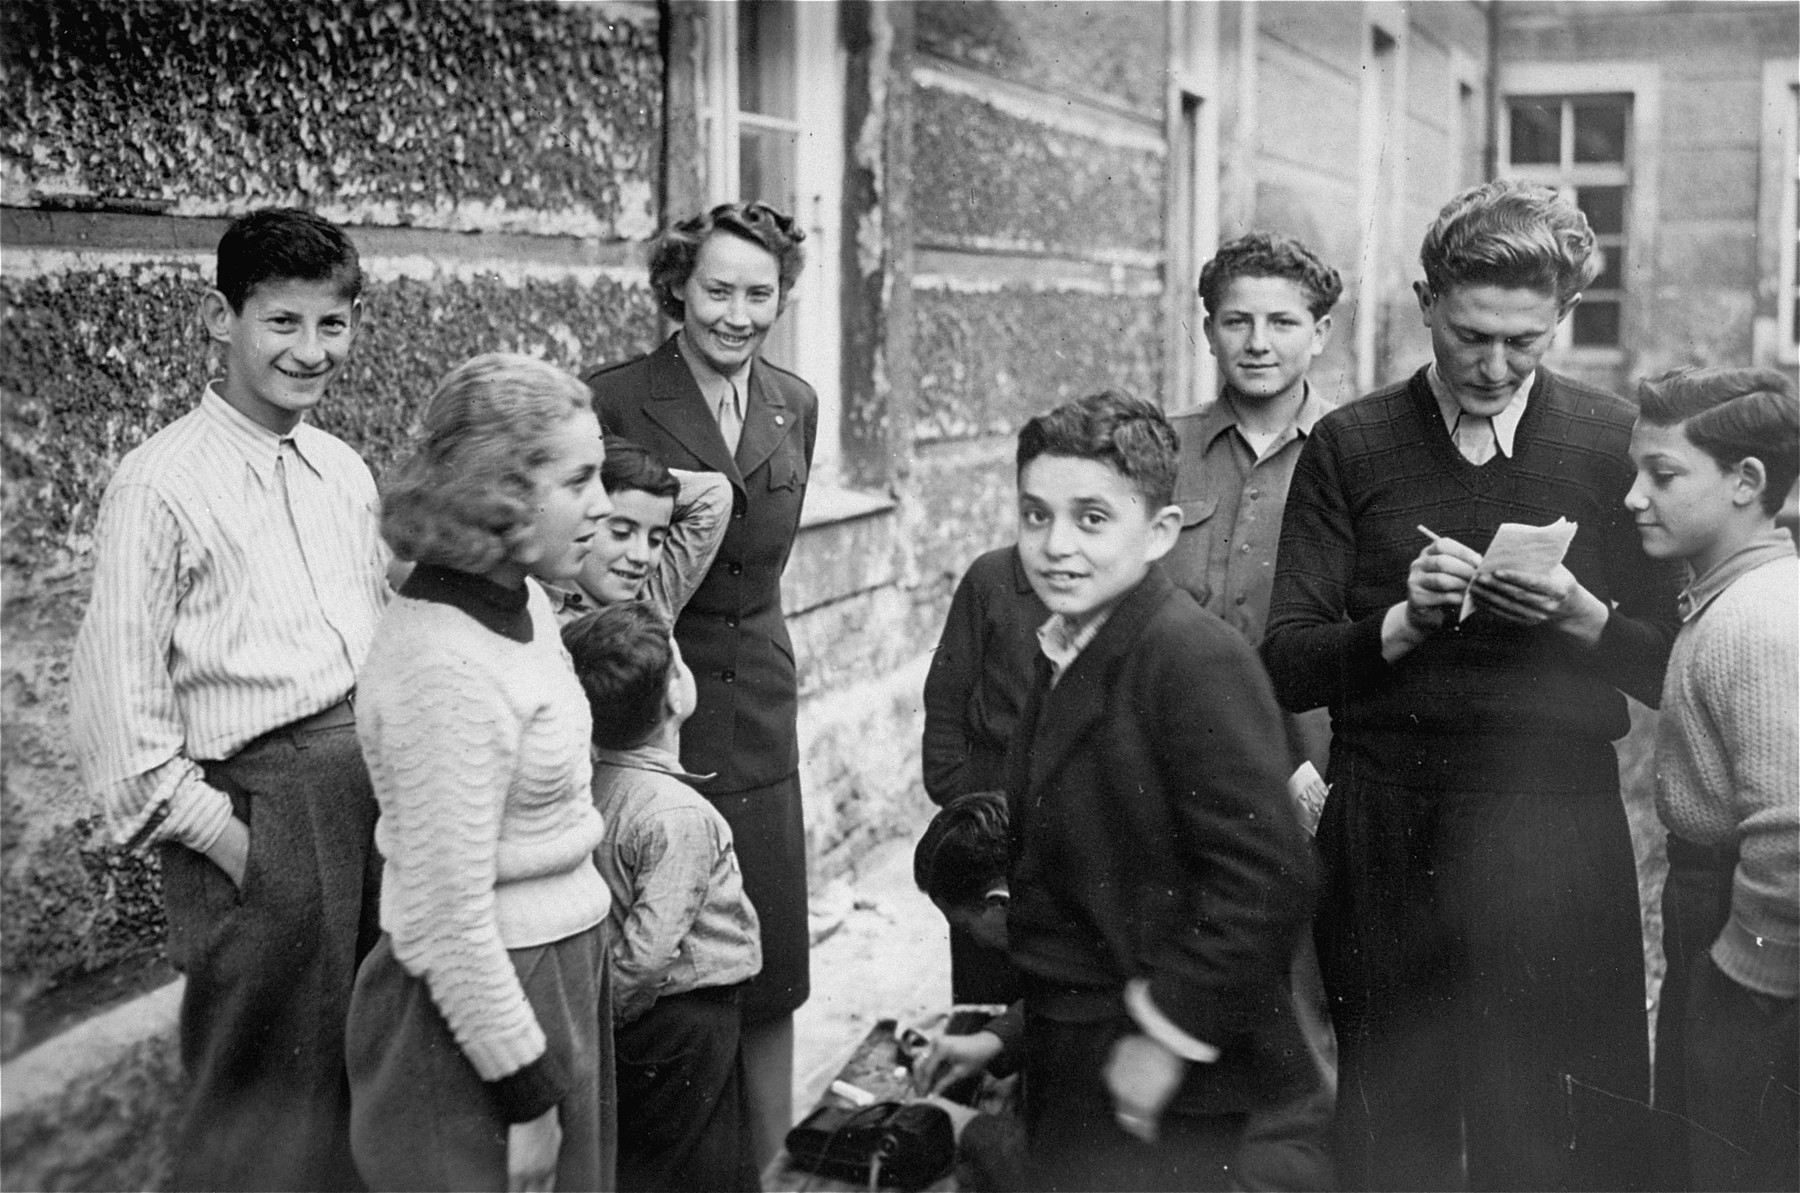 UNRRA relief worker Marion E Hutton talk to some of the children in front of the Kloster Indersdorf DP children's center.

Wladislaus Fischer is on the far left.  Nina Krieger is second from the left.  In the middle is Steve Israeler.  Also pictured partially obscured are the two Weinstock brothers.  Mioses Sztajnkeler is in the center right facing the camera and Dezider Kahan is second from the right.